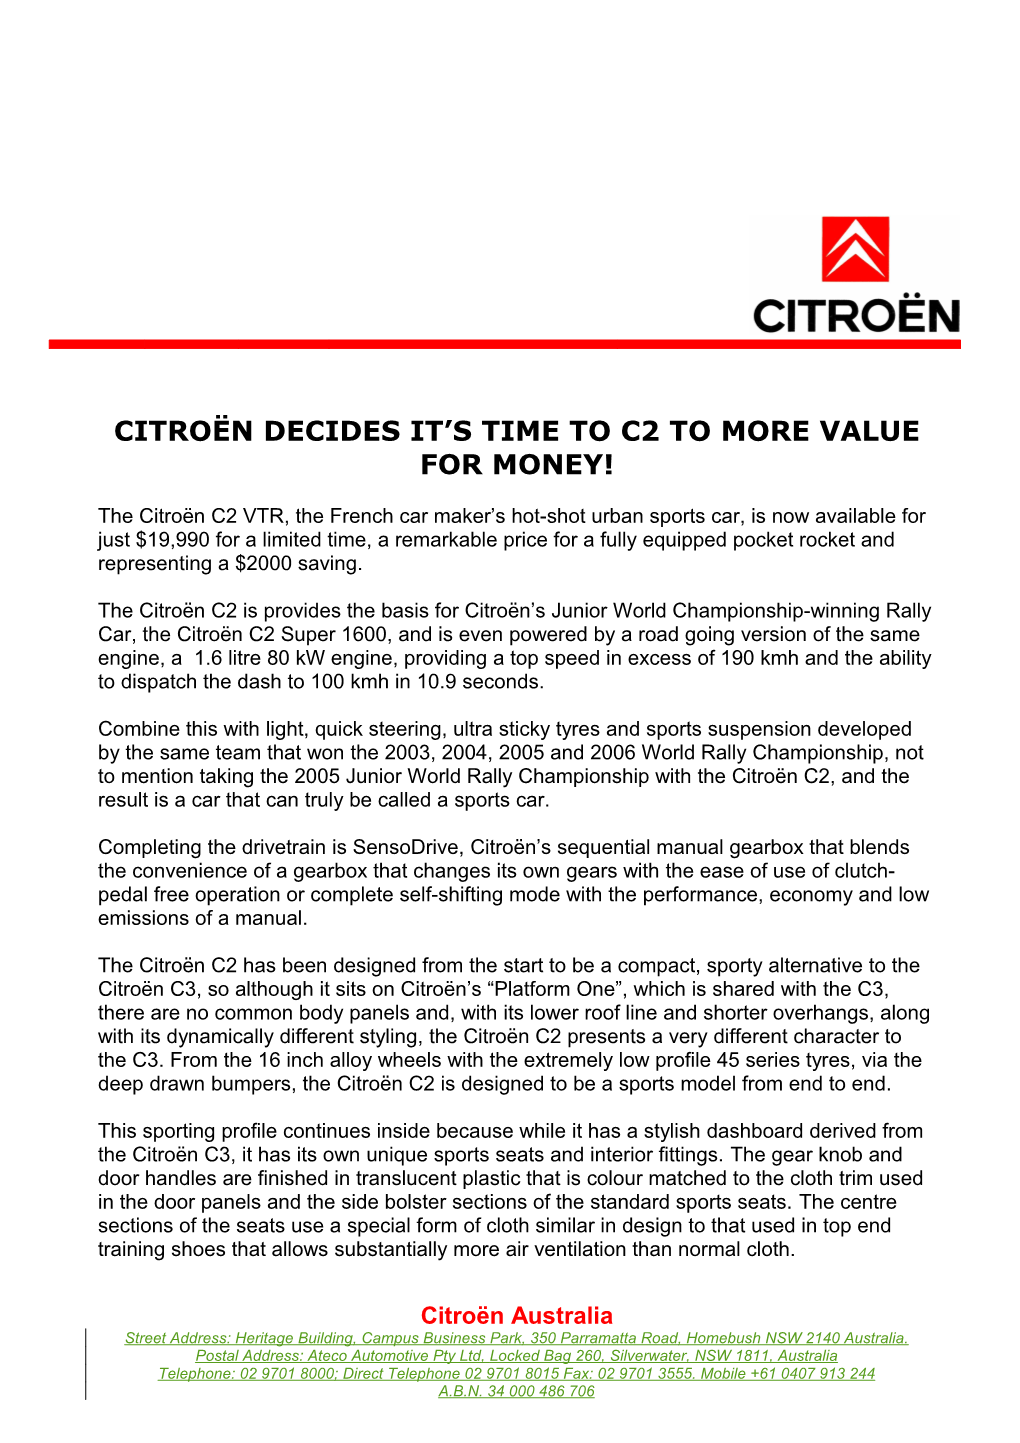 Citroën Decides It S Time to C2 to More Value for Money!